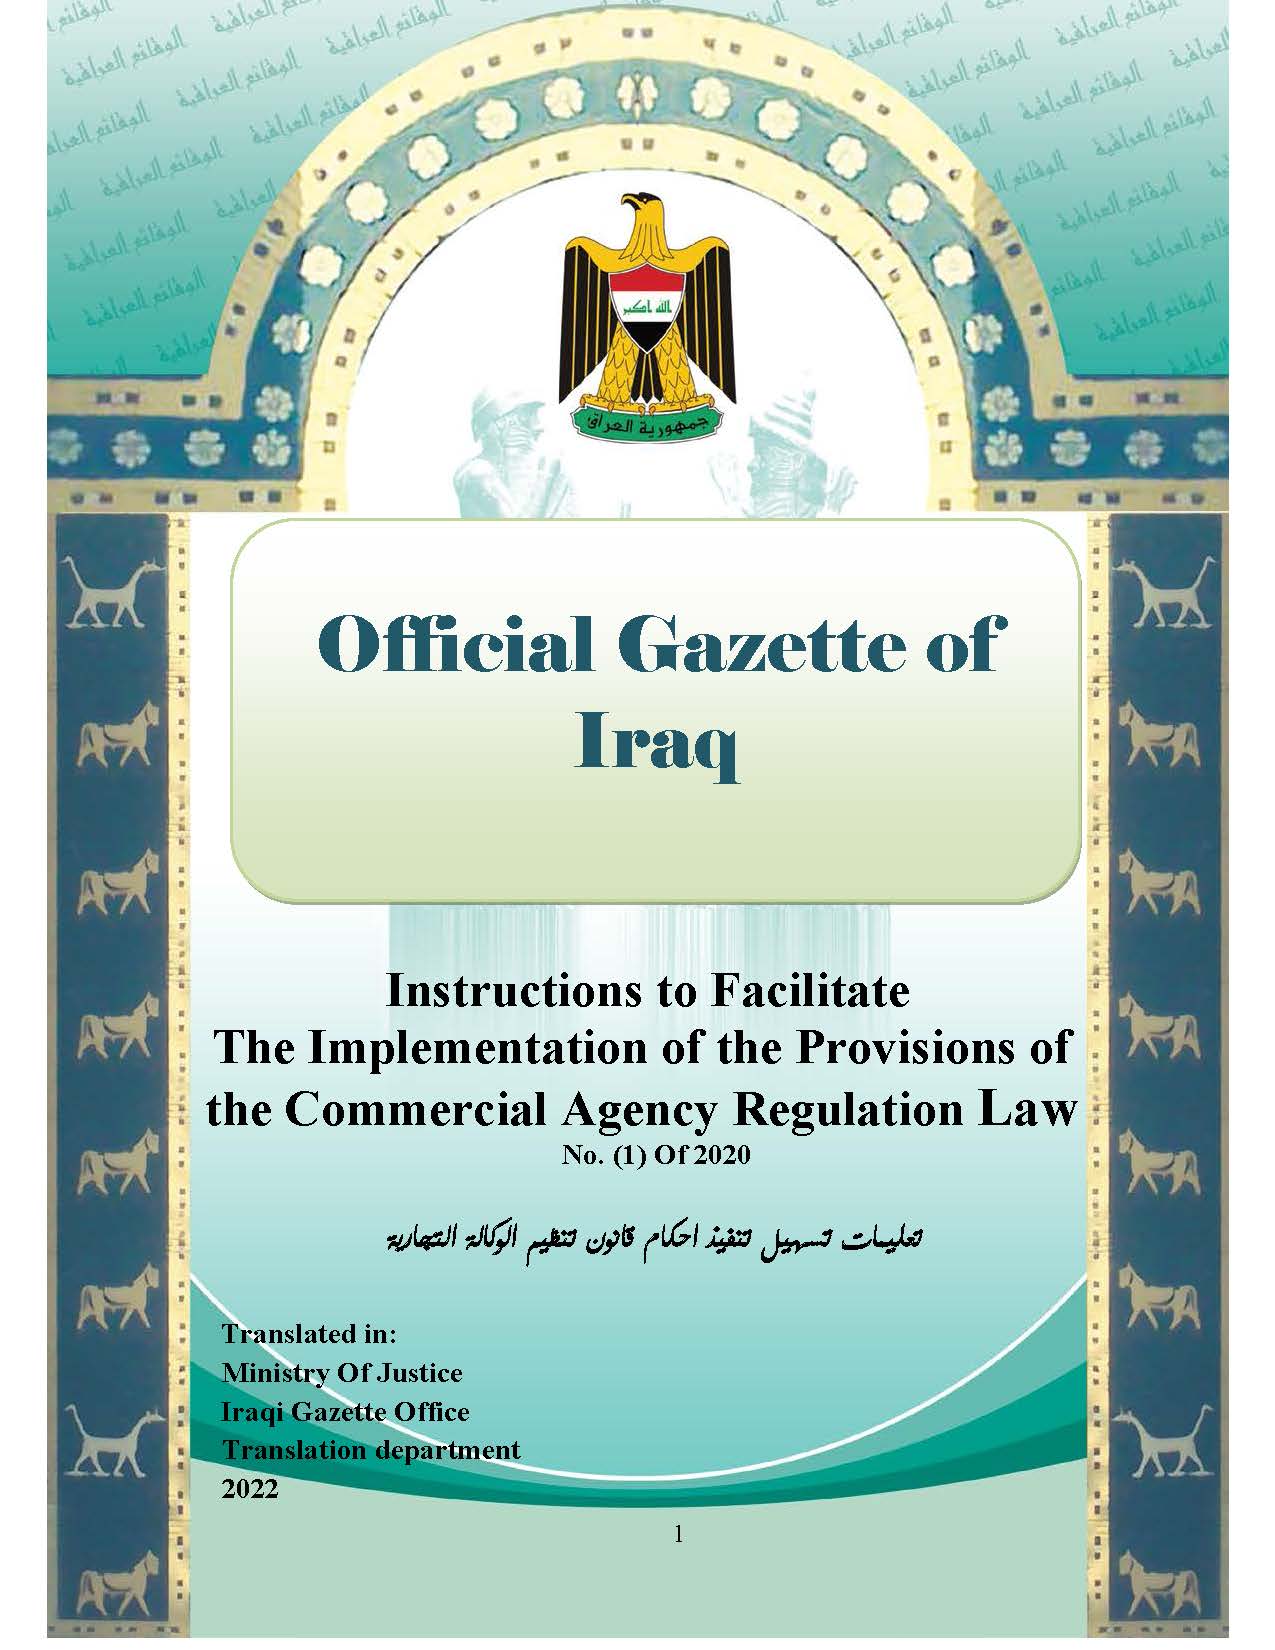 Instructions to Facilitate the Implementation of the Provisions of the Commercial Agency Regulation Law No(1) of 2020